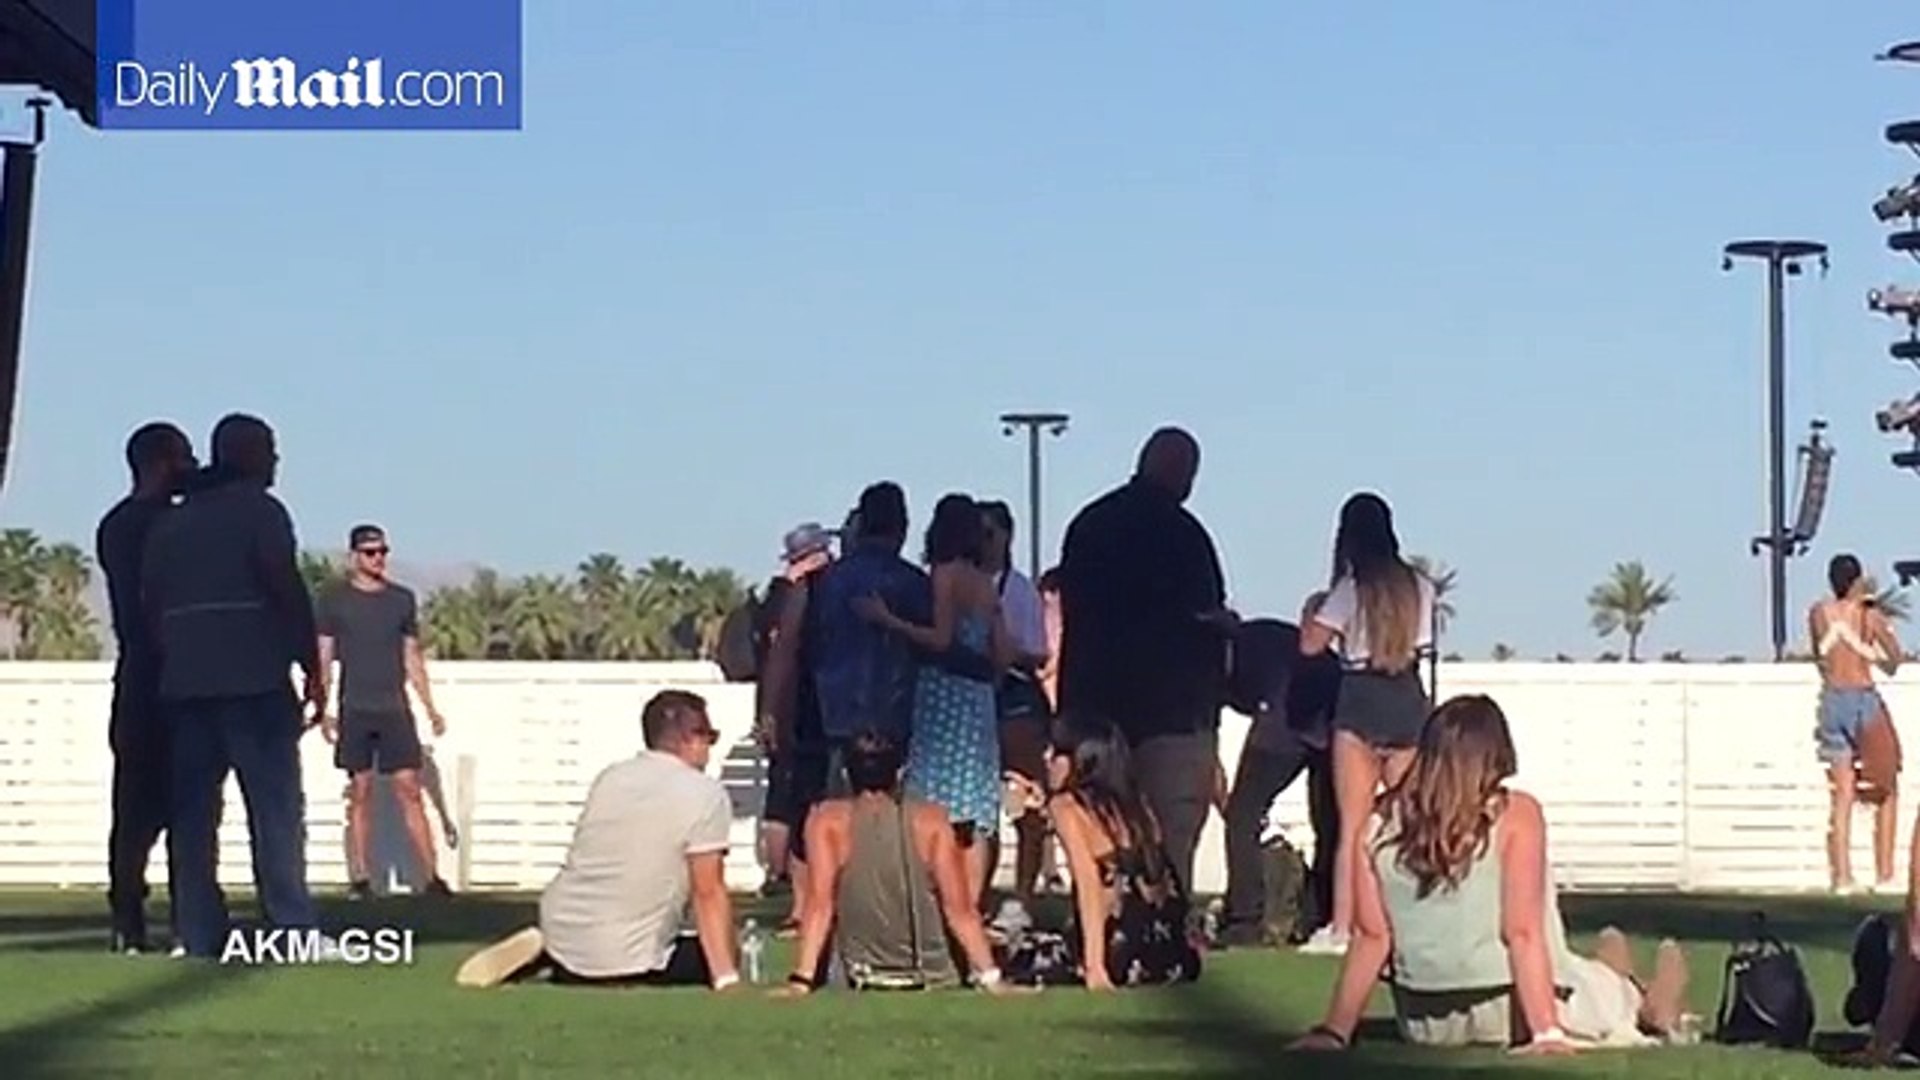 Selena Gomez and The Weeknd pack on the PDA at Coachella